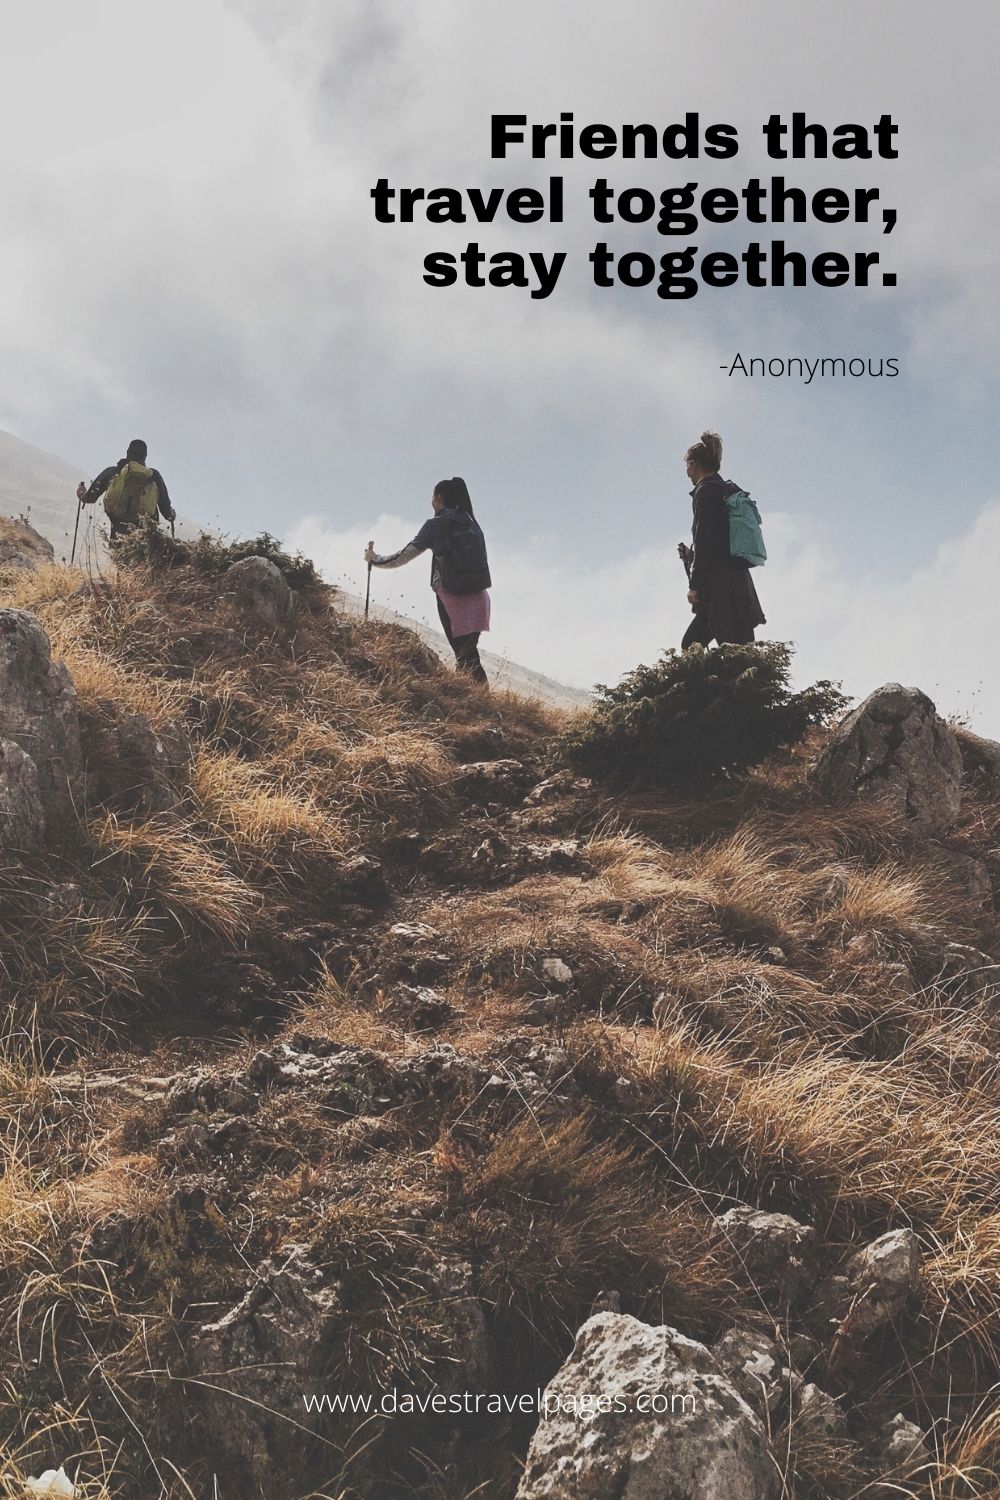 Friends travel Quotes: Friends that travel together, stay together.